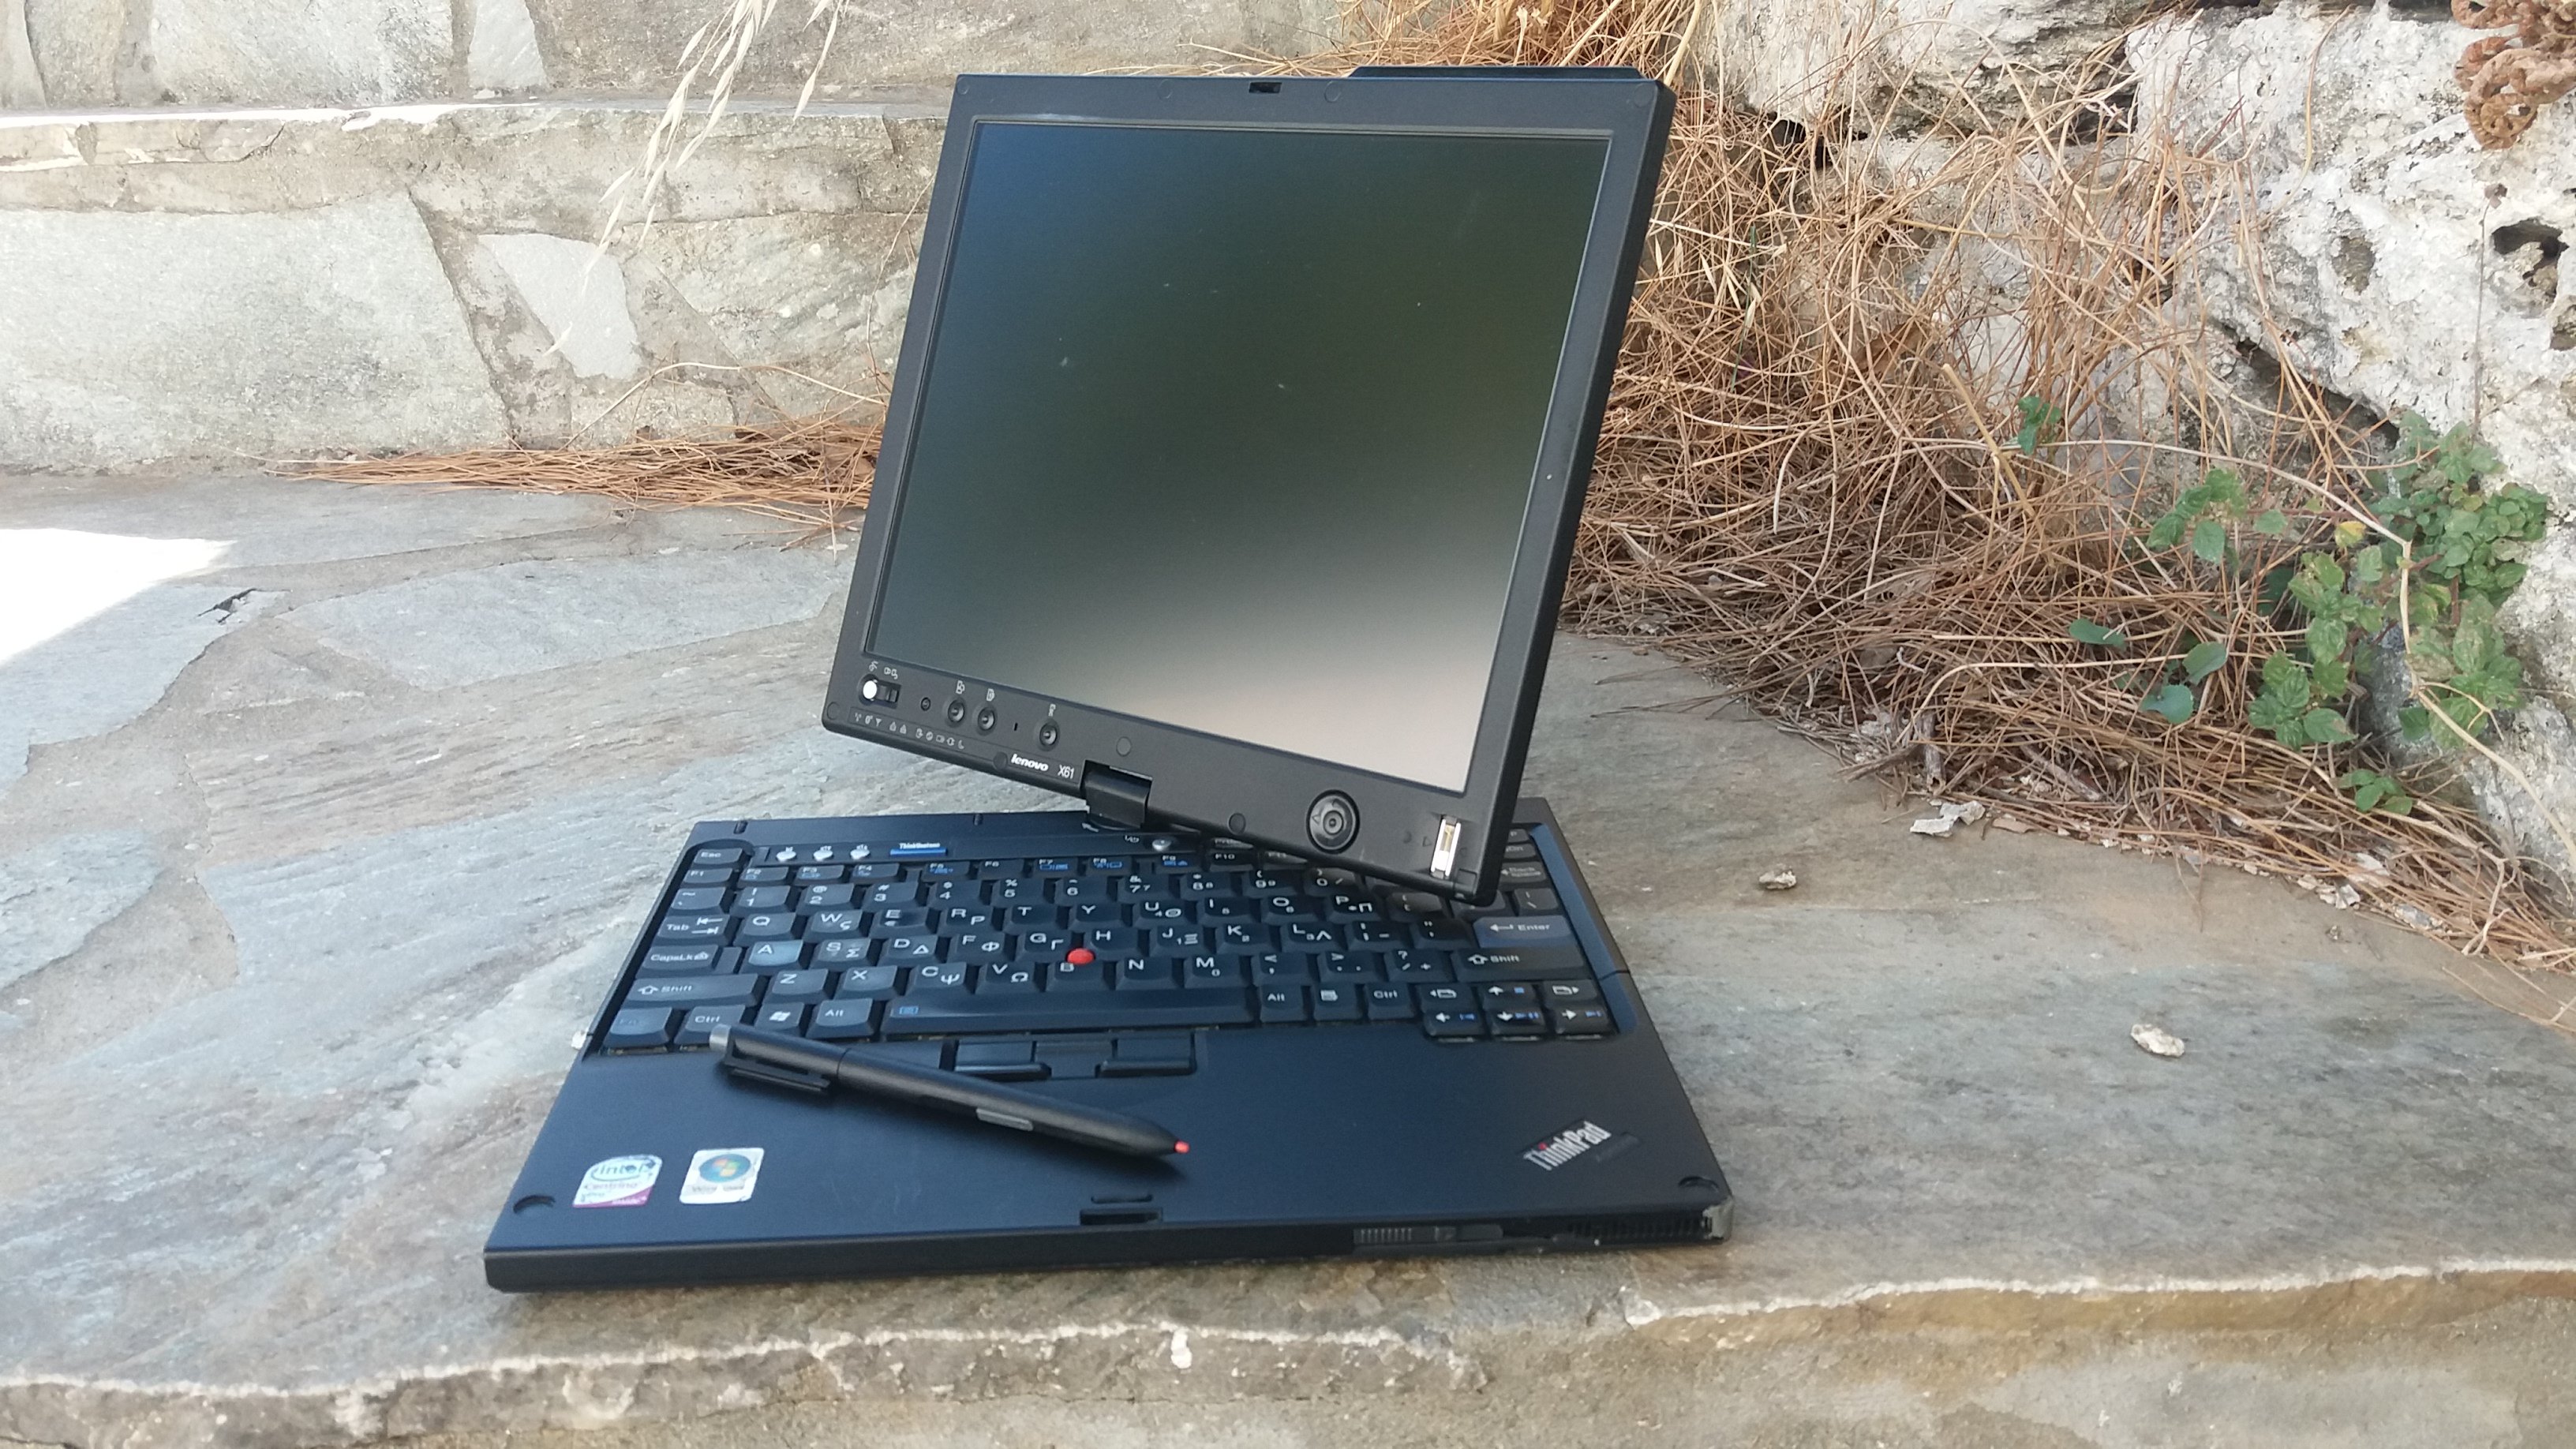 More information about "thinkpad x61 tablet"